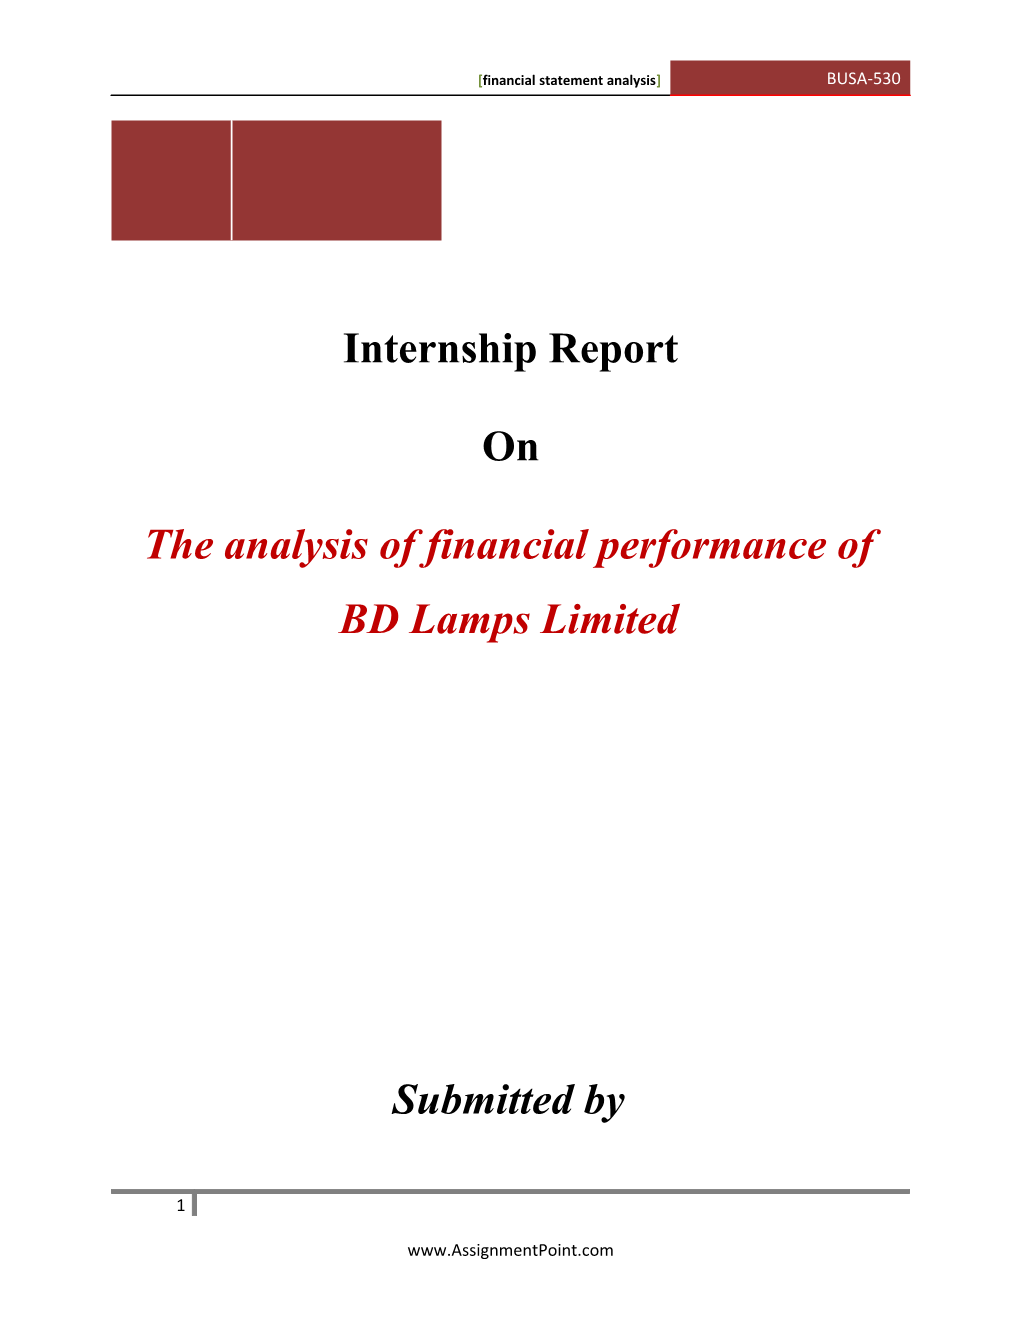 The Analysis of Financial Performance of BD Lamps Limited